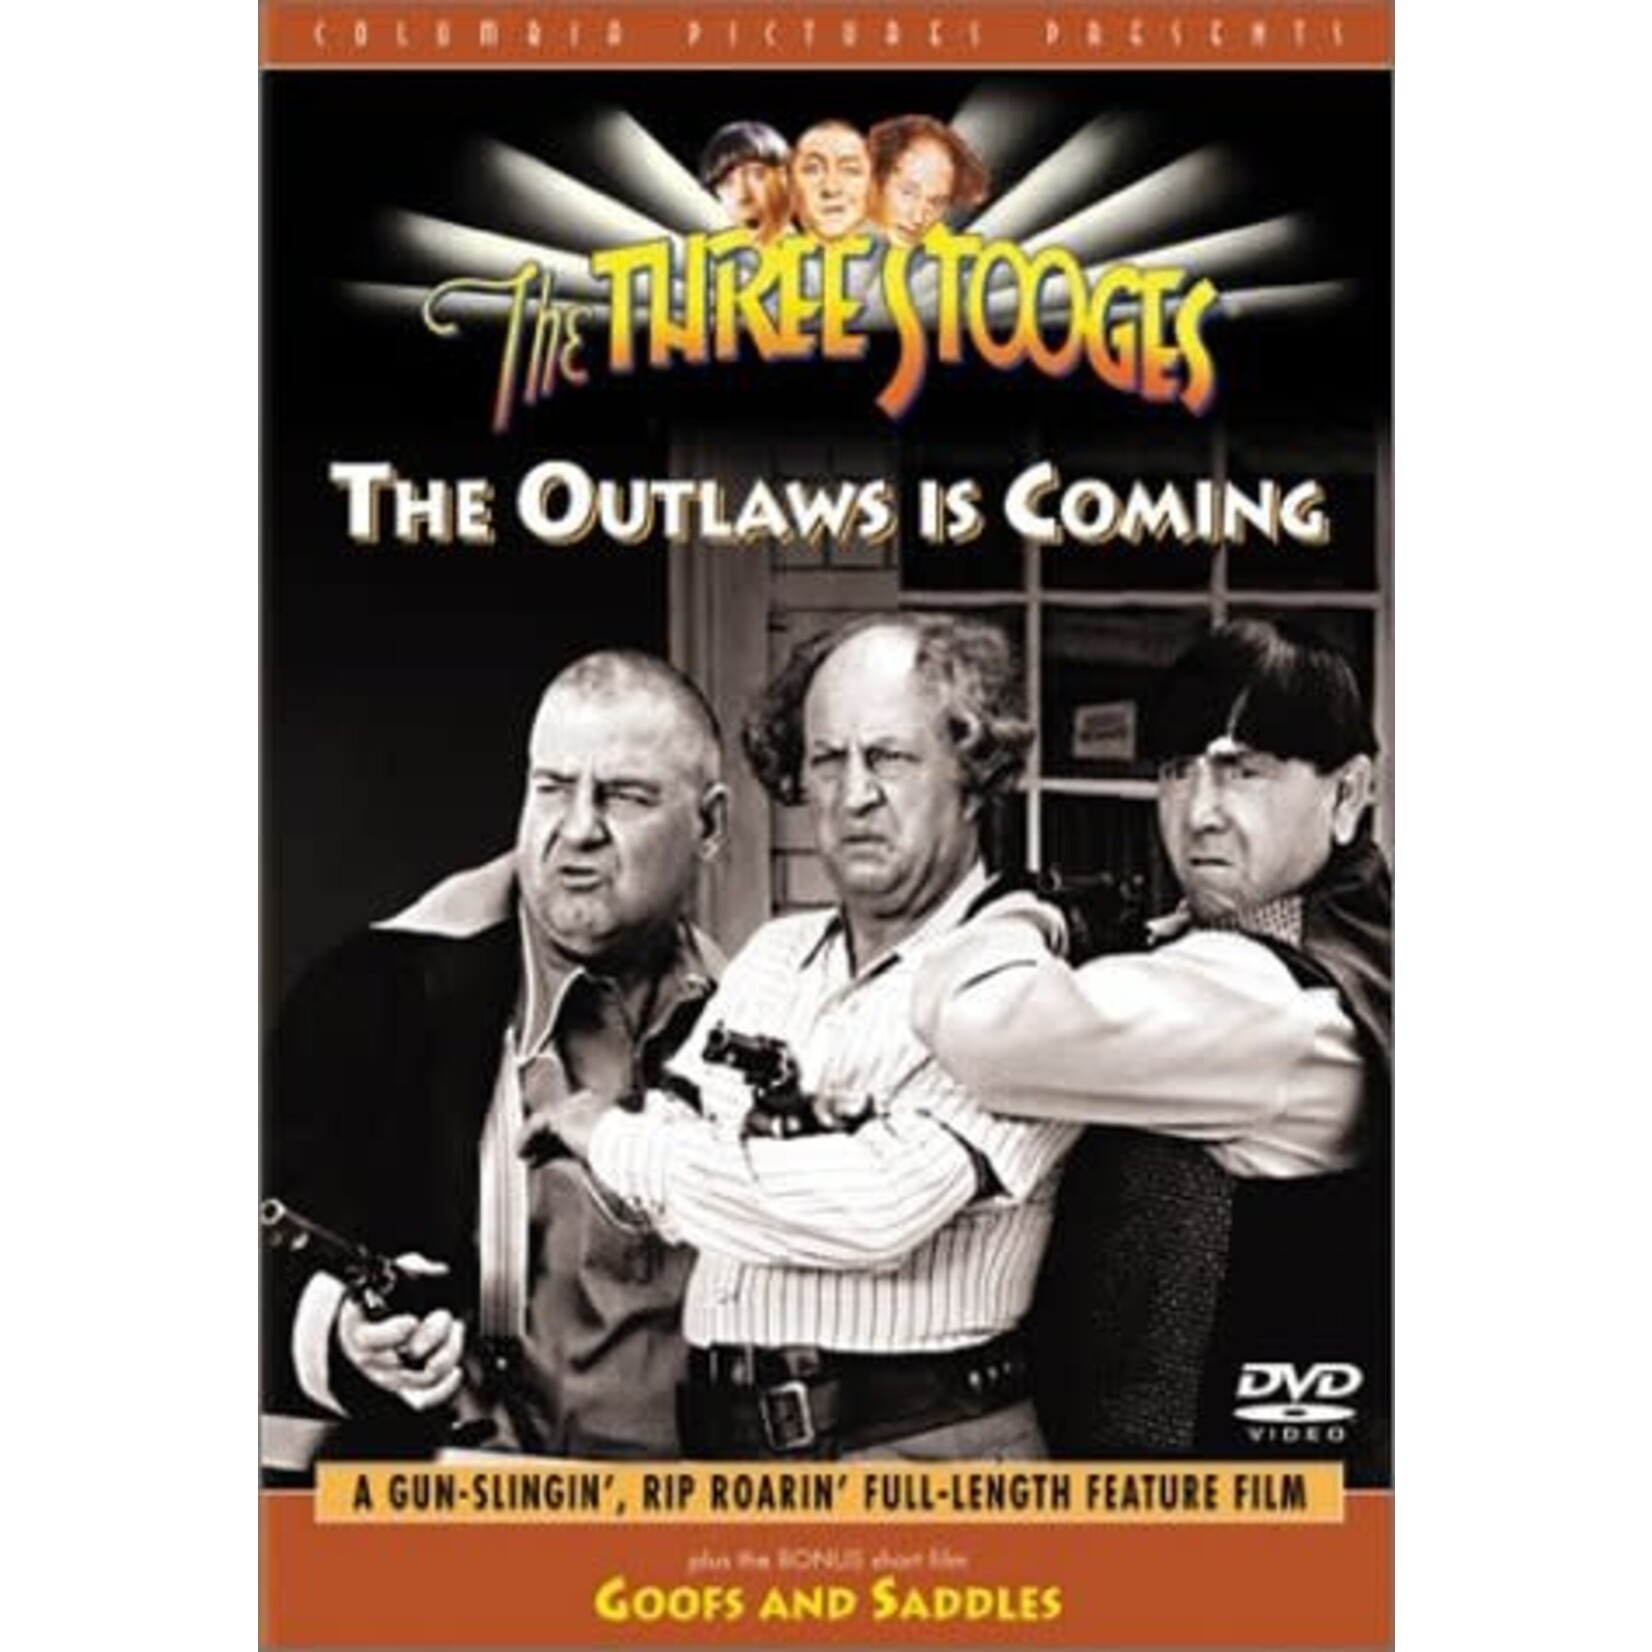 Three Stooges - The Outlaws Is Coming [USED DVD]